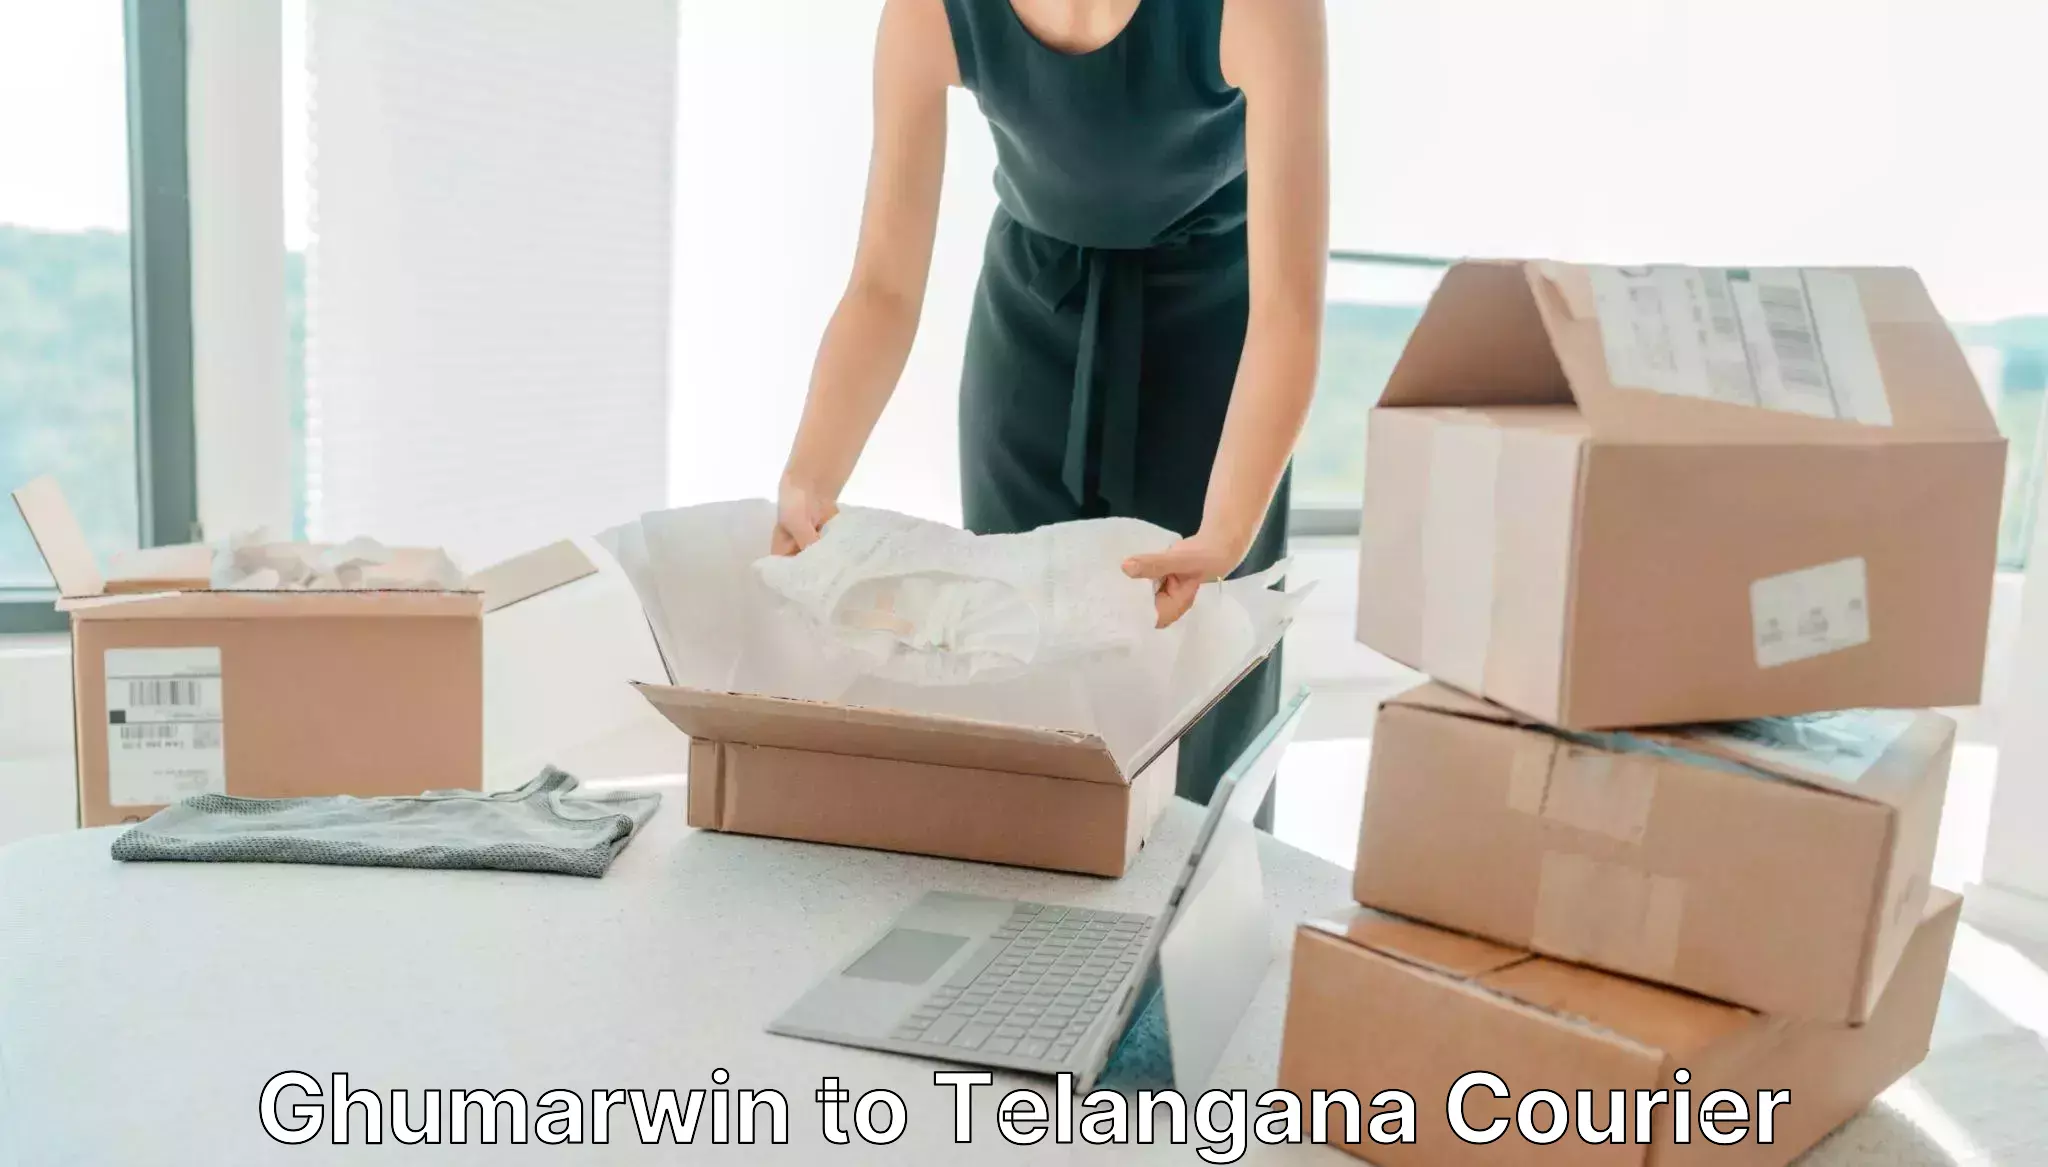 Courier rate comparison in Ghumarwin to Rangareddy